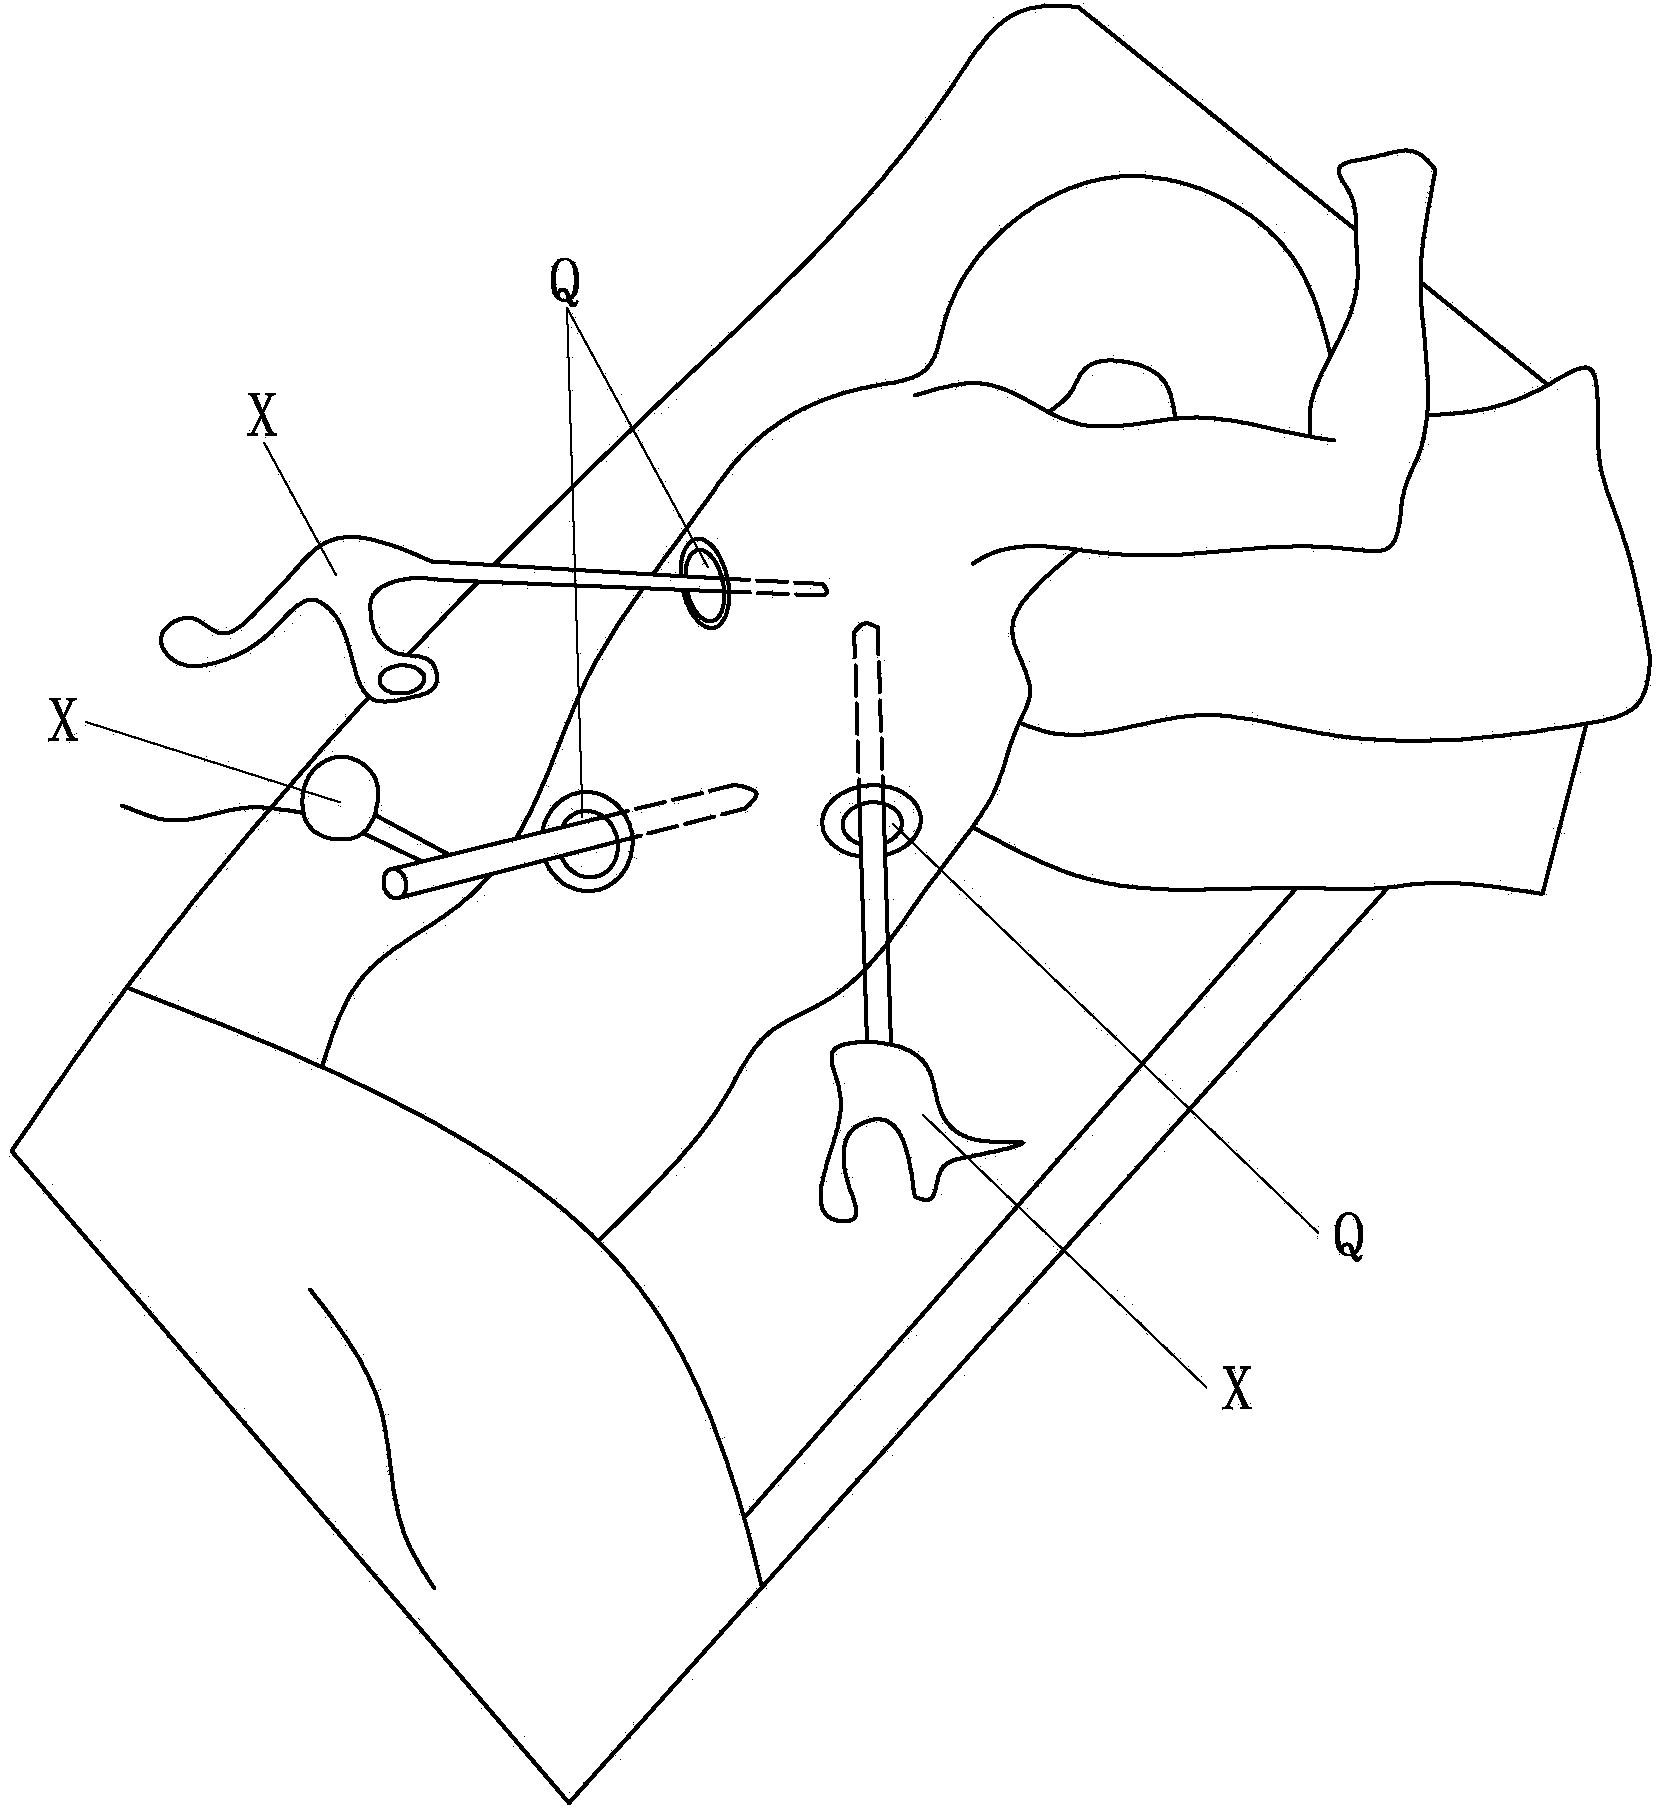 L-shaped video assisted thoracoscopic surgery showing device